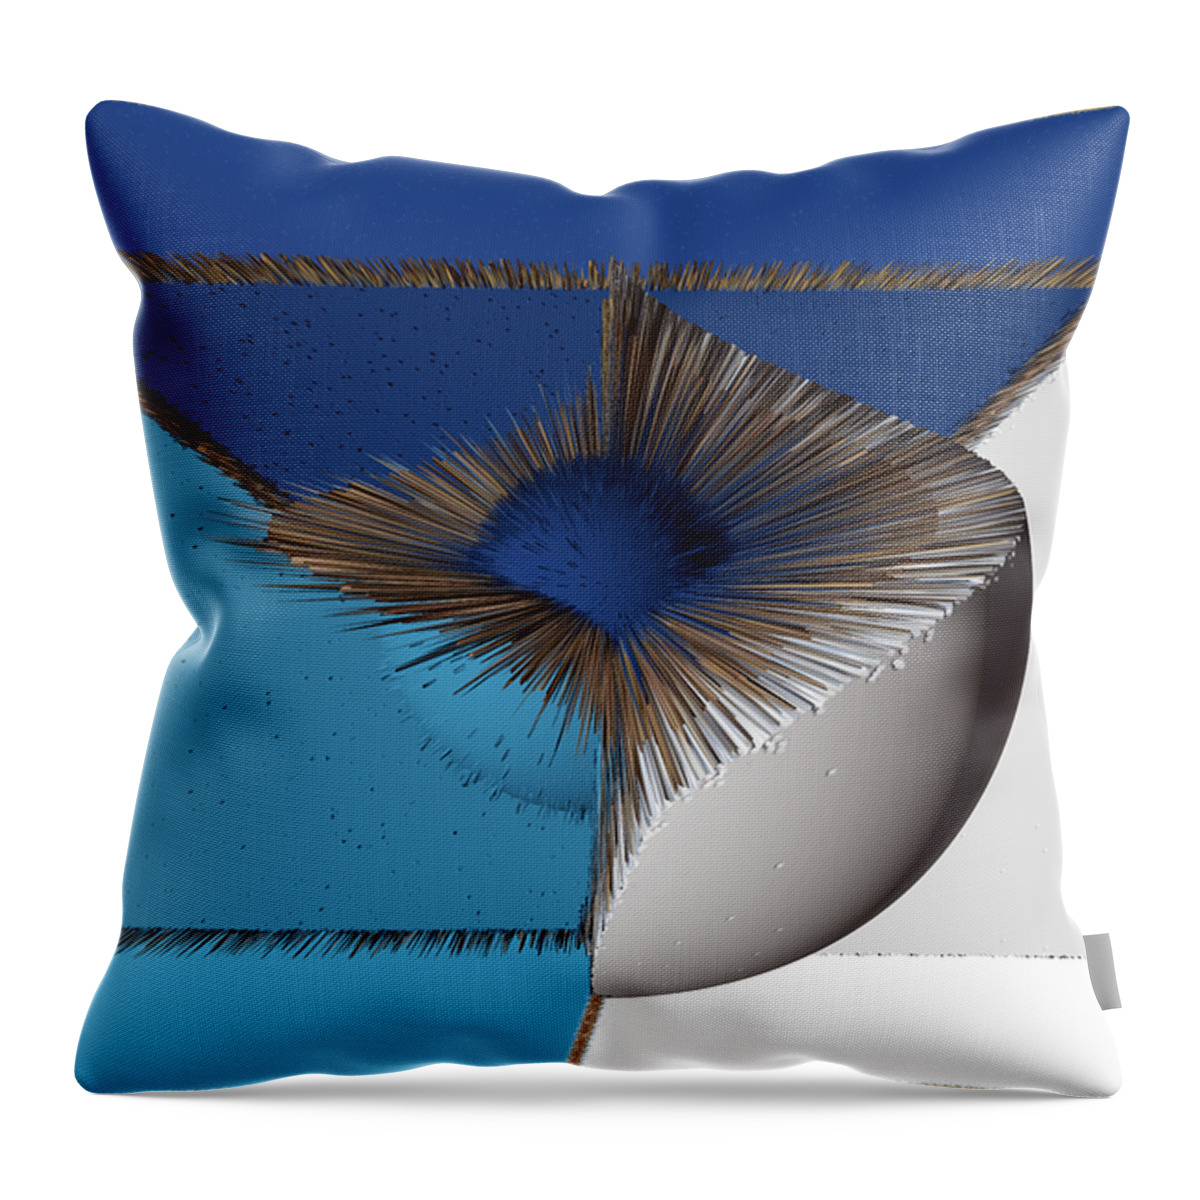 3d Throw Pillow featuring the digital art 3D Abstract 19 by Angelina Tamez